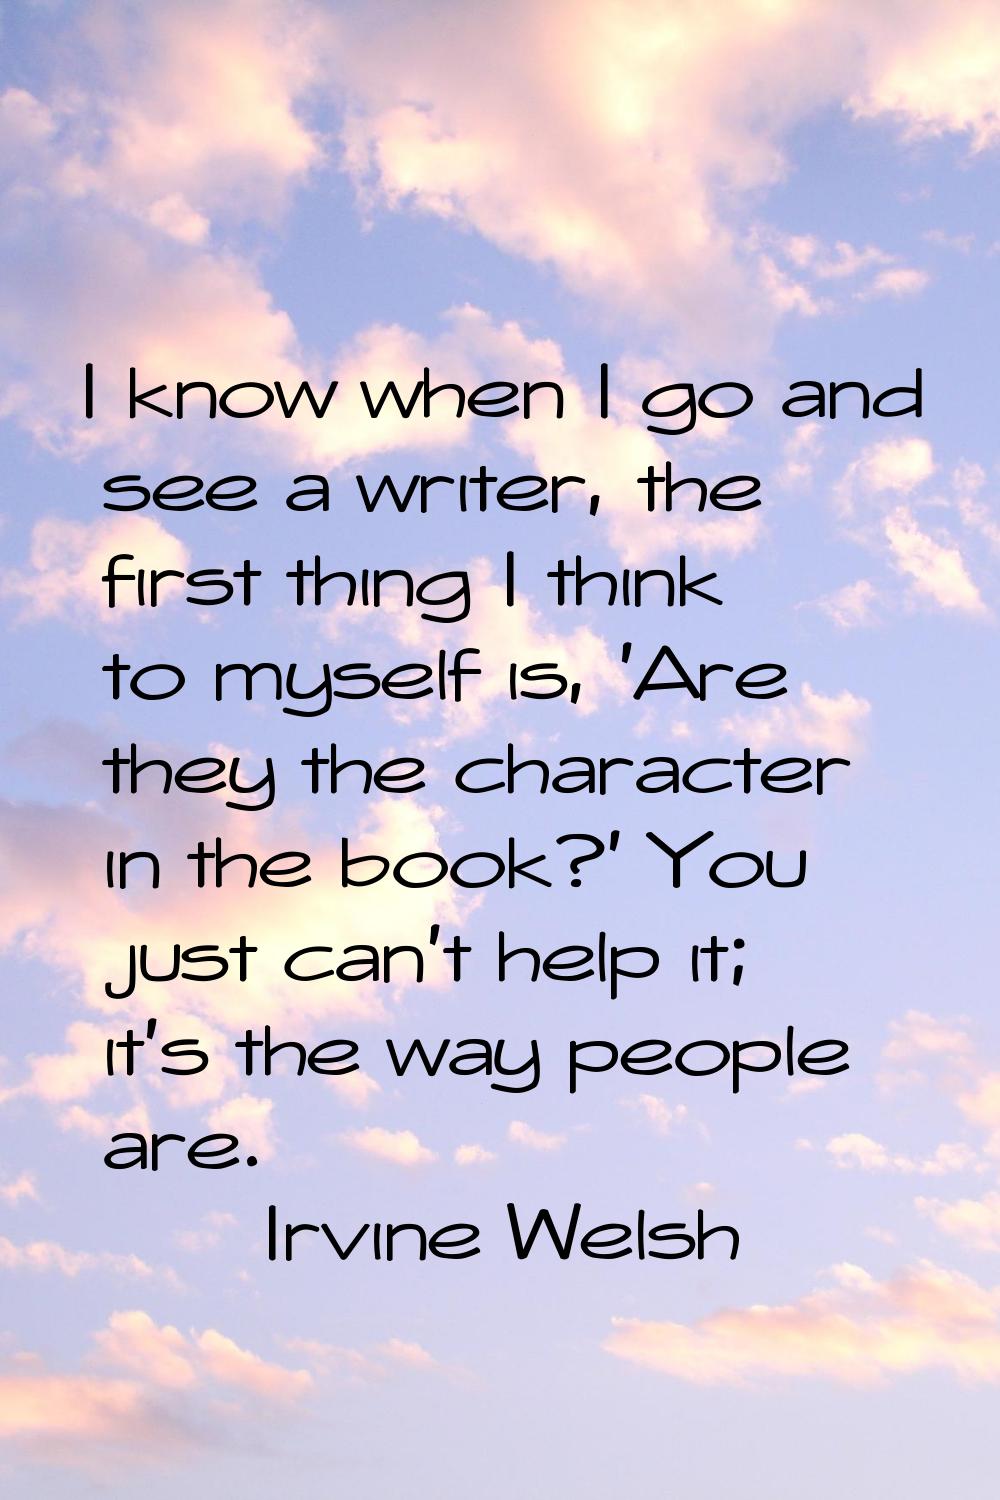 I know when I go and see a writer, the first thing I think to myself is, 'Are they the character in